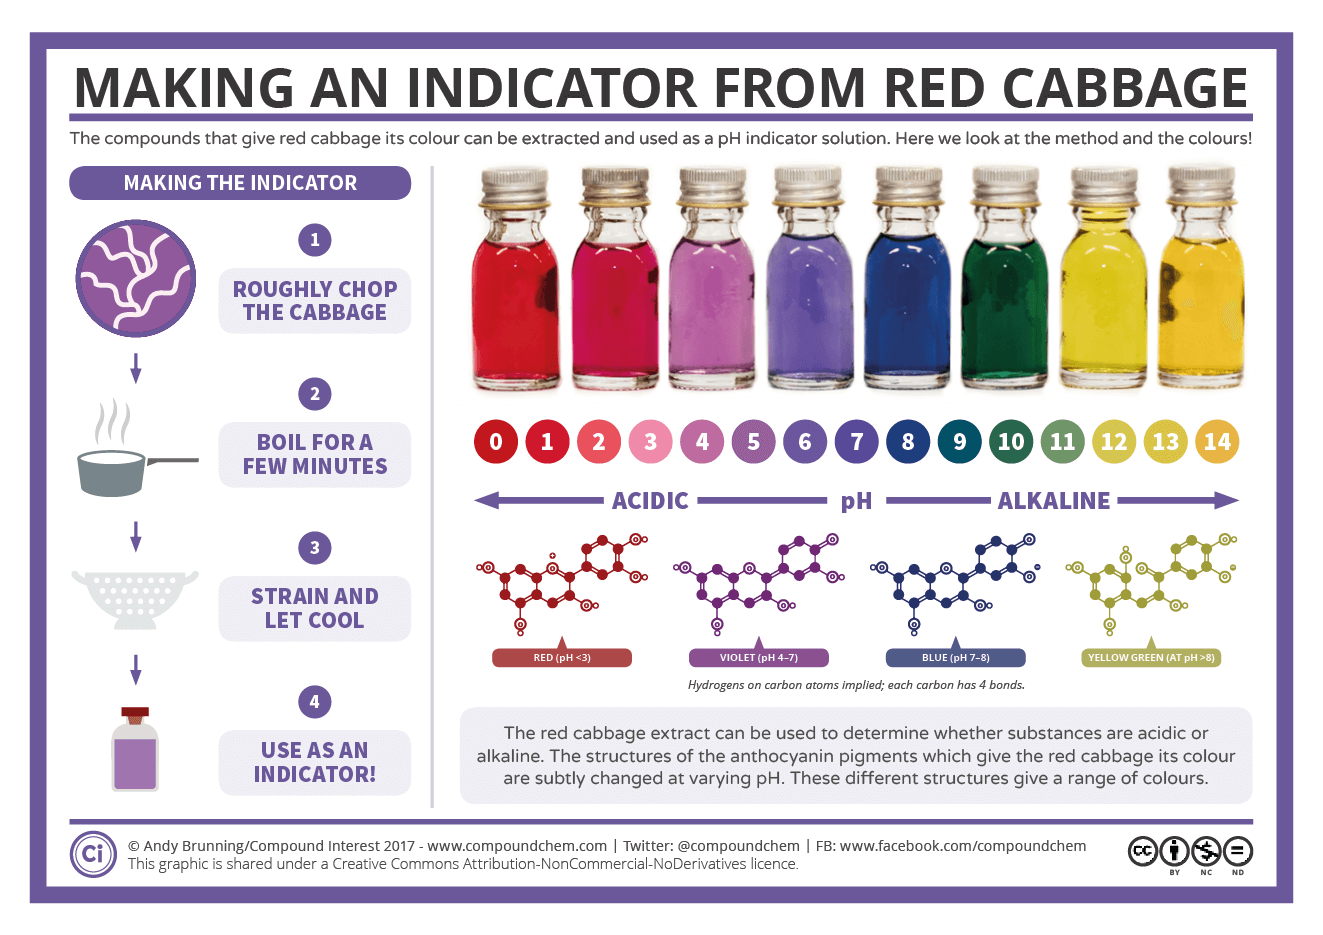 Making an indicator from red cabbage 
(credit: compoundchem.com/2017/05/18/red-cabbage/) 